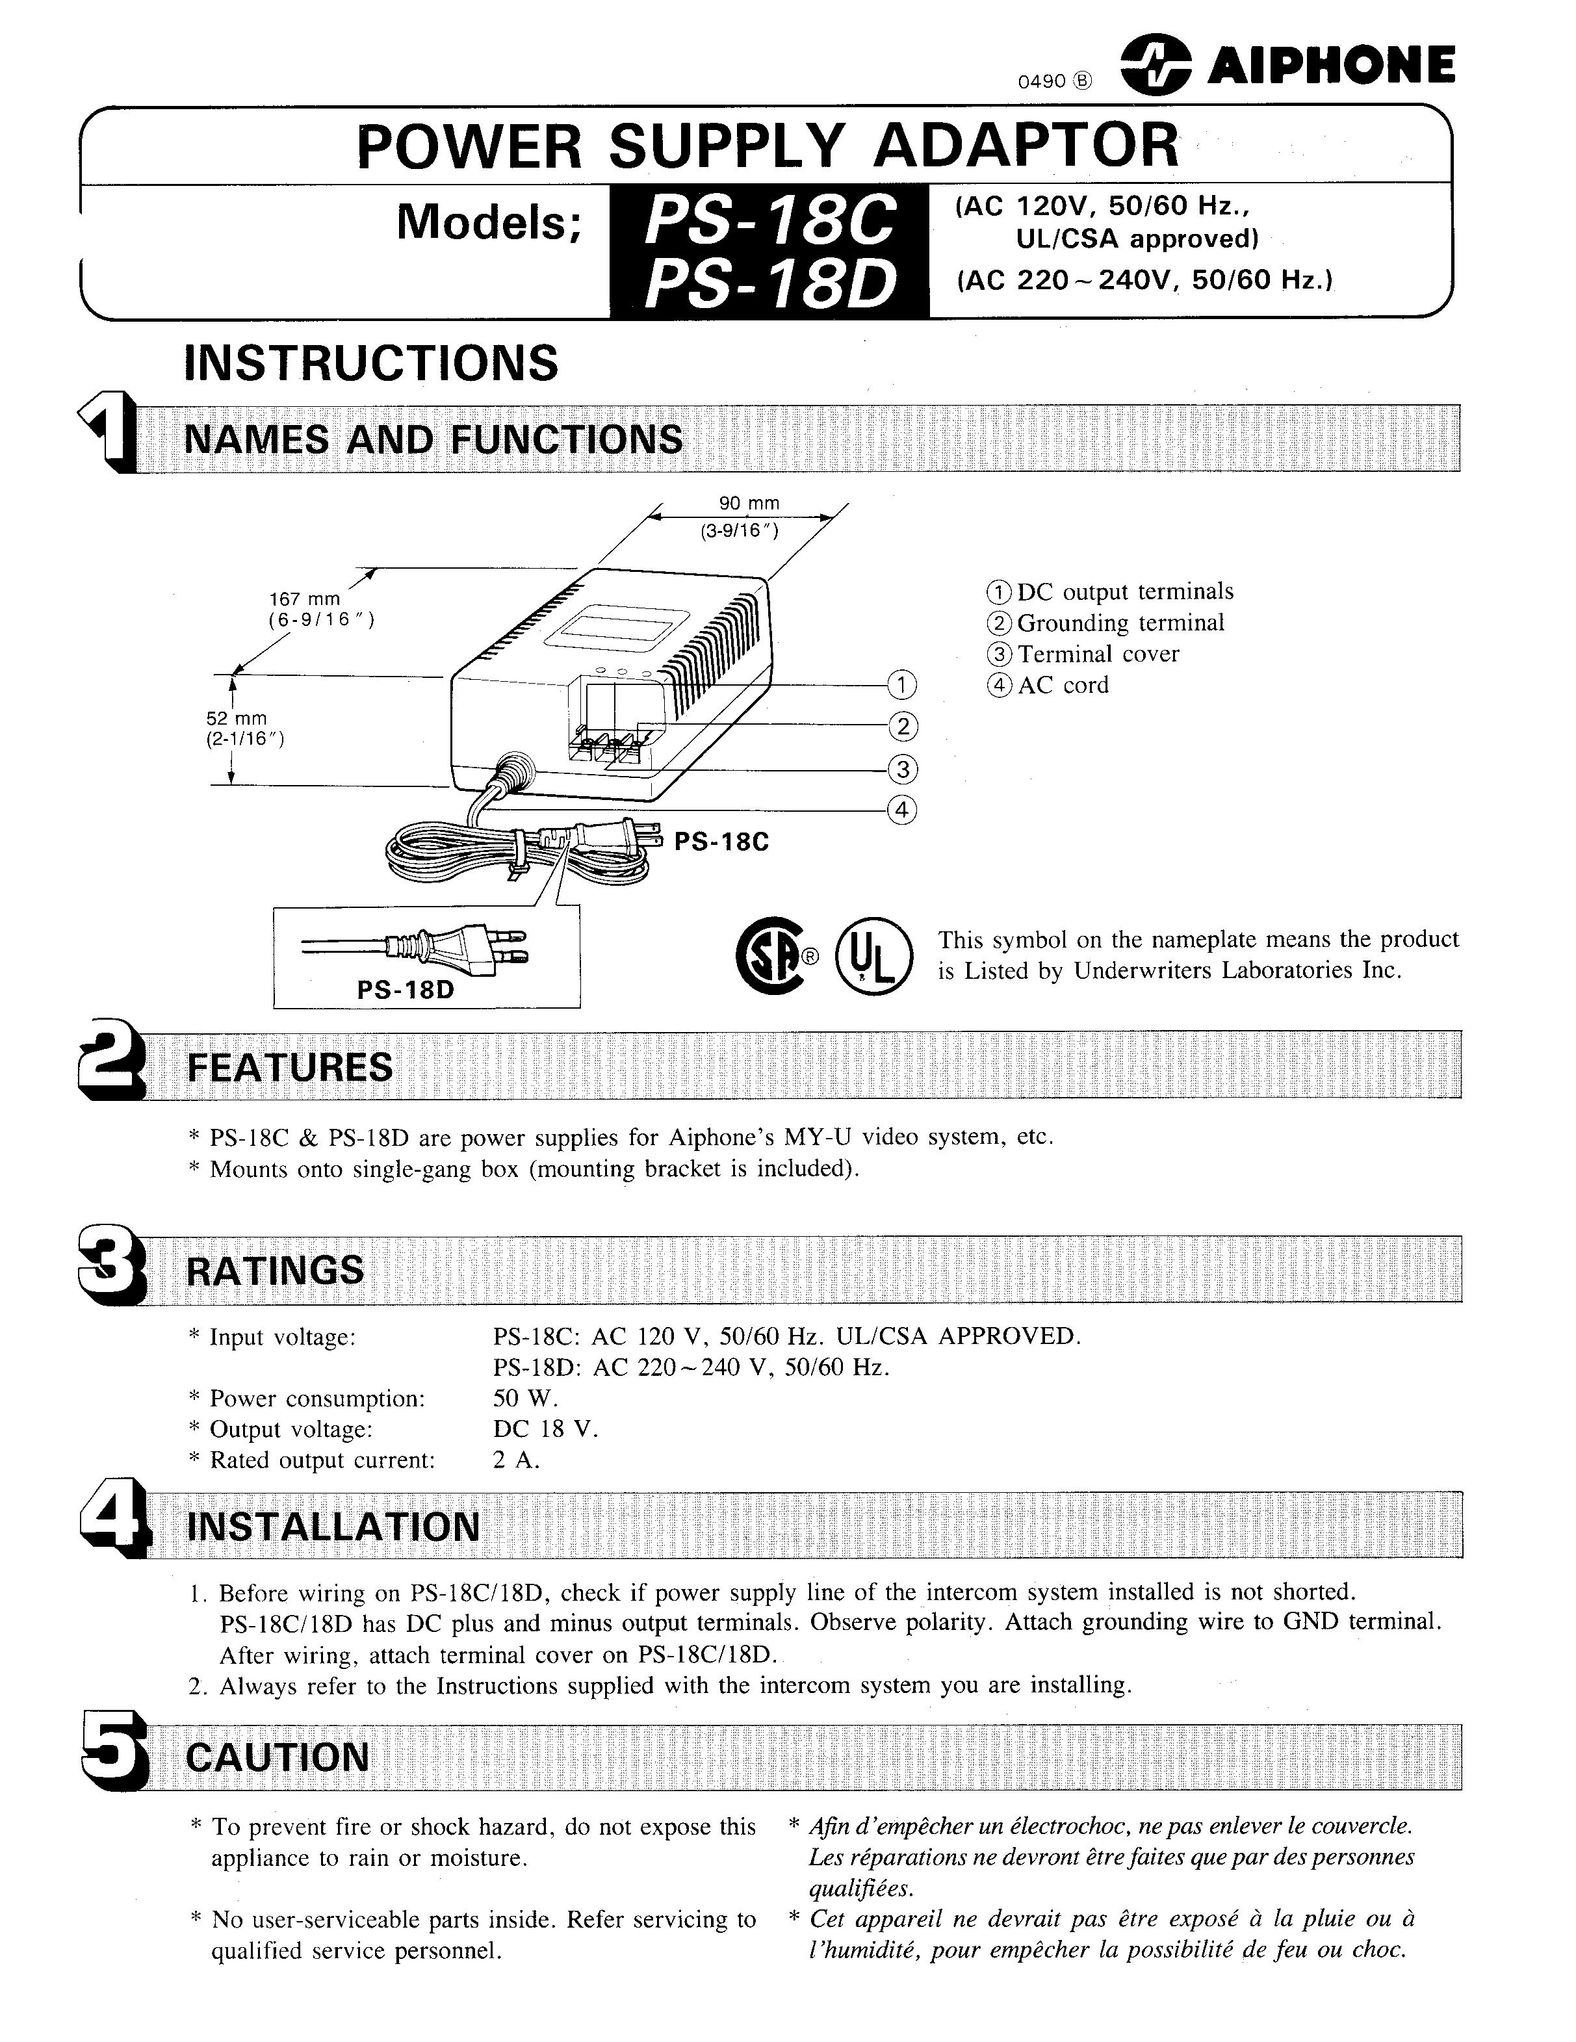 Aiphone PS-18C Power Supply User Manual